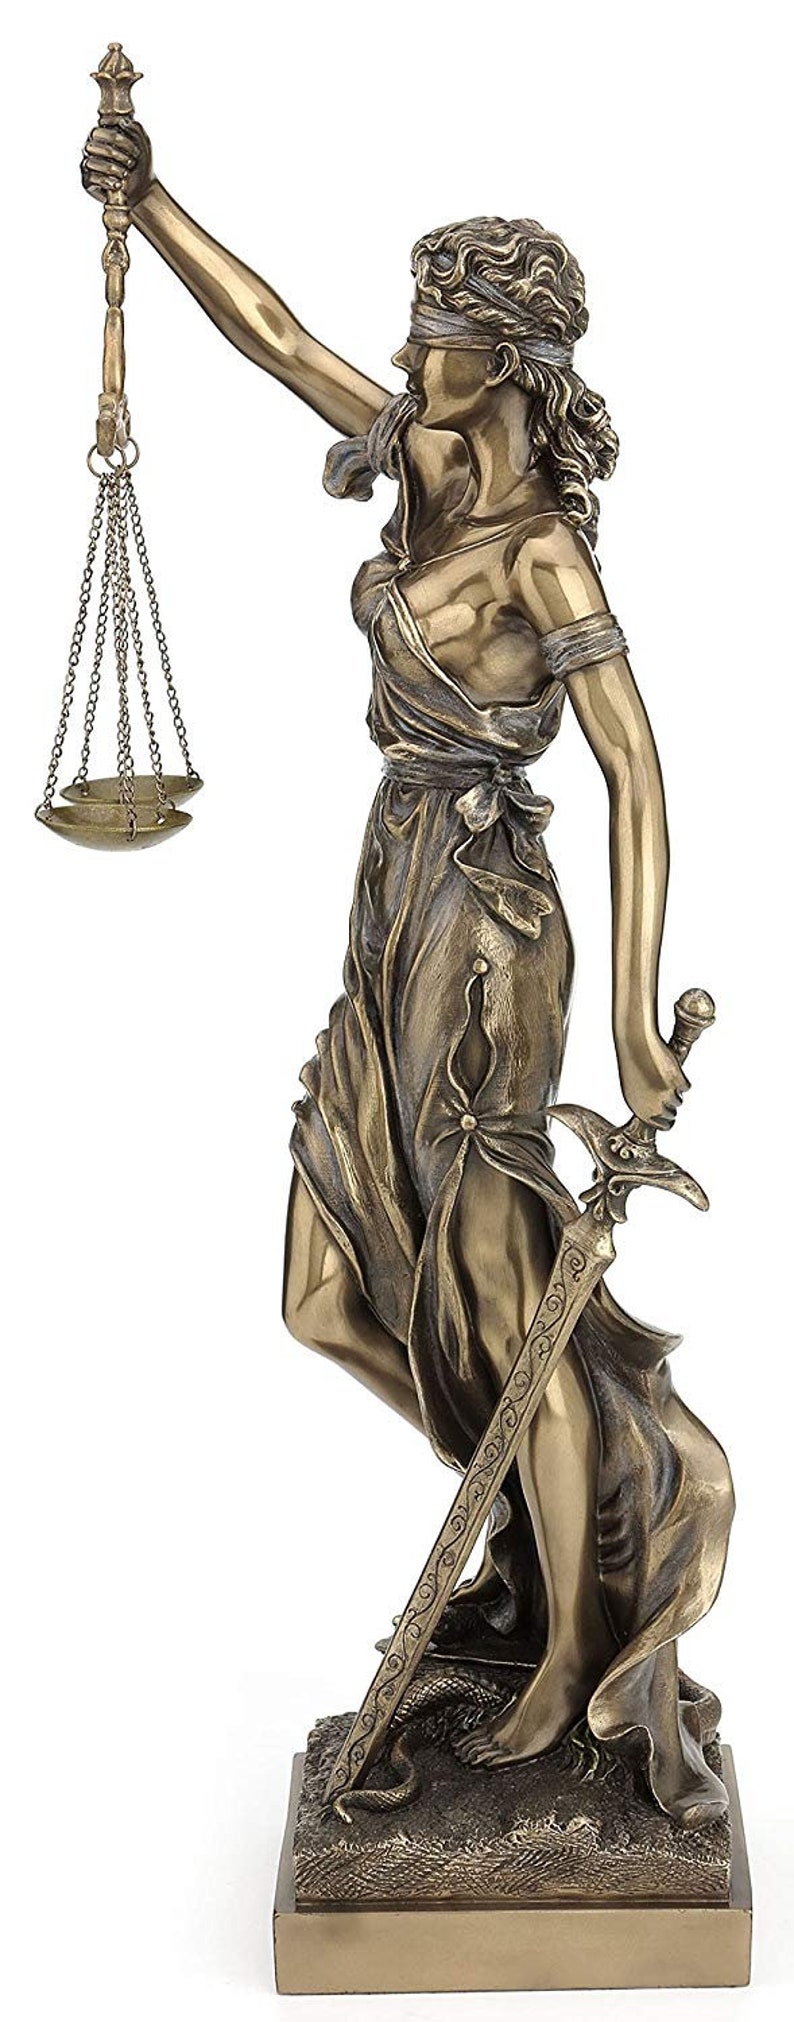 Blind Lady Justice Statue, Greek Statue, Bronze Statue, Office Gift, Gifts for Lawyers, Engraved Statue, Greek Goddess Statue,Divine Goddess image 10